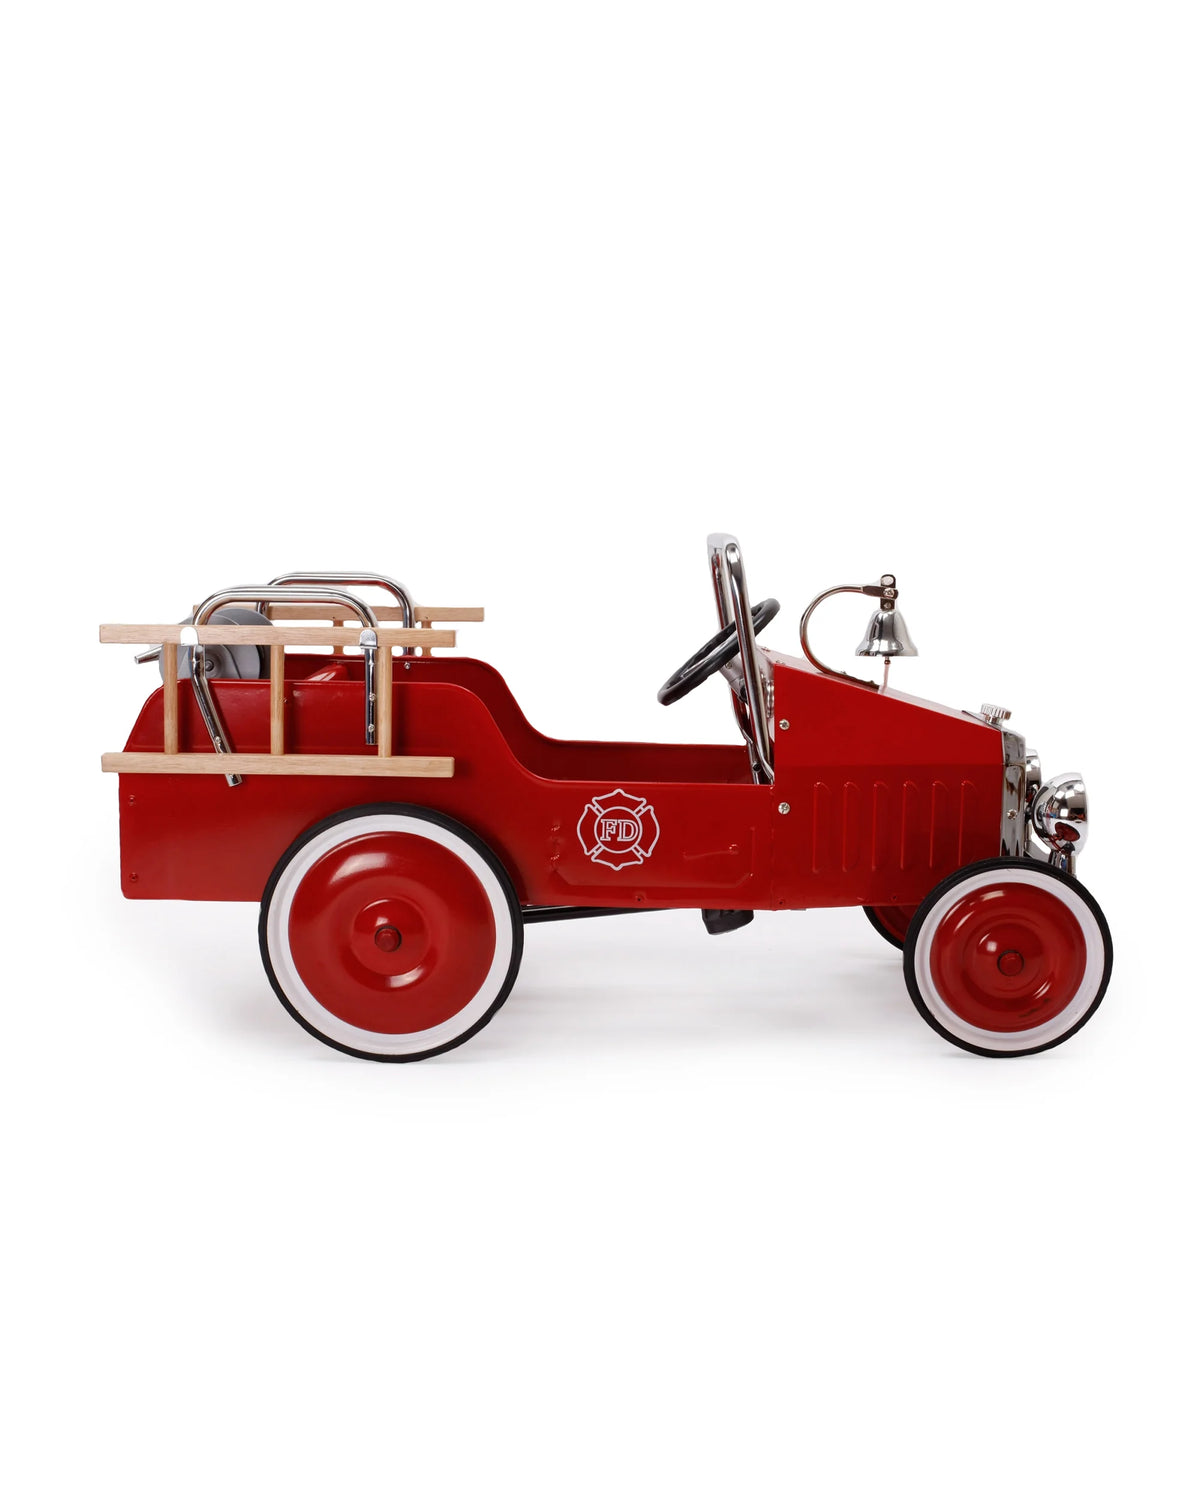 Pedal Fire Truck by Baghera